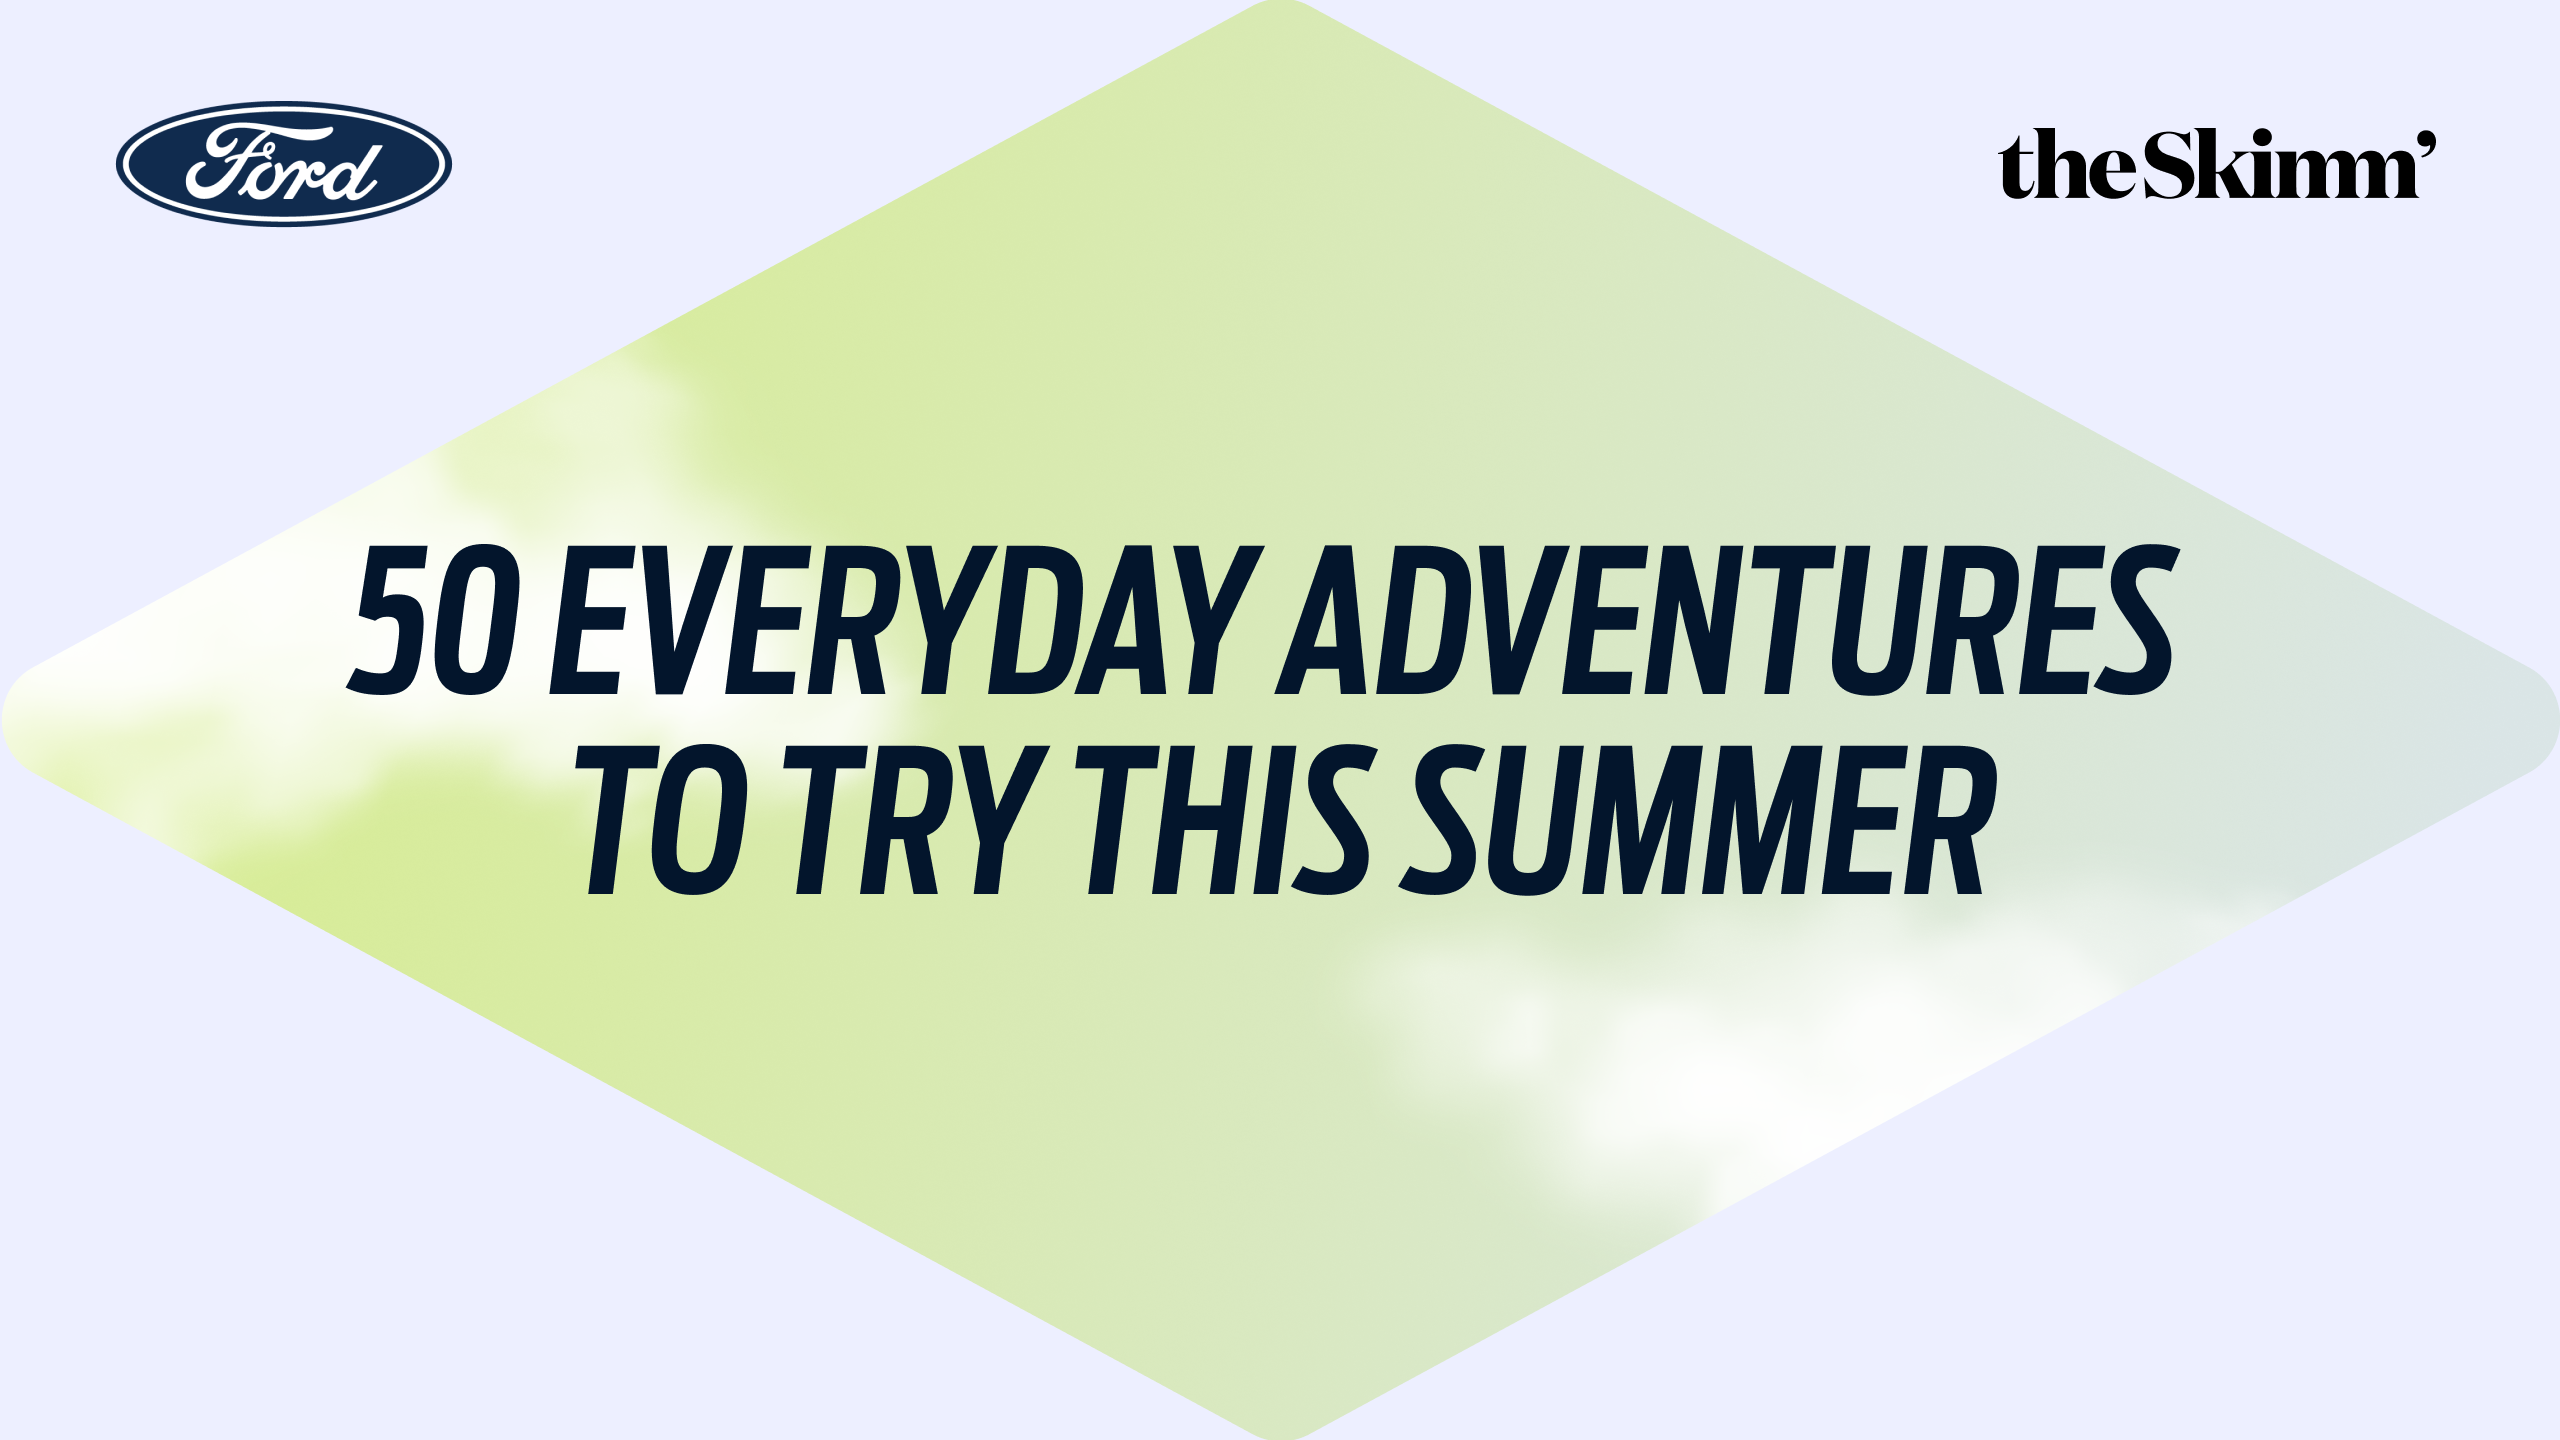 "50 Everyday Adventures to Try This Summer"